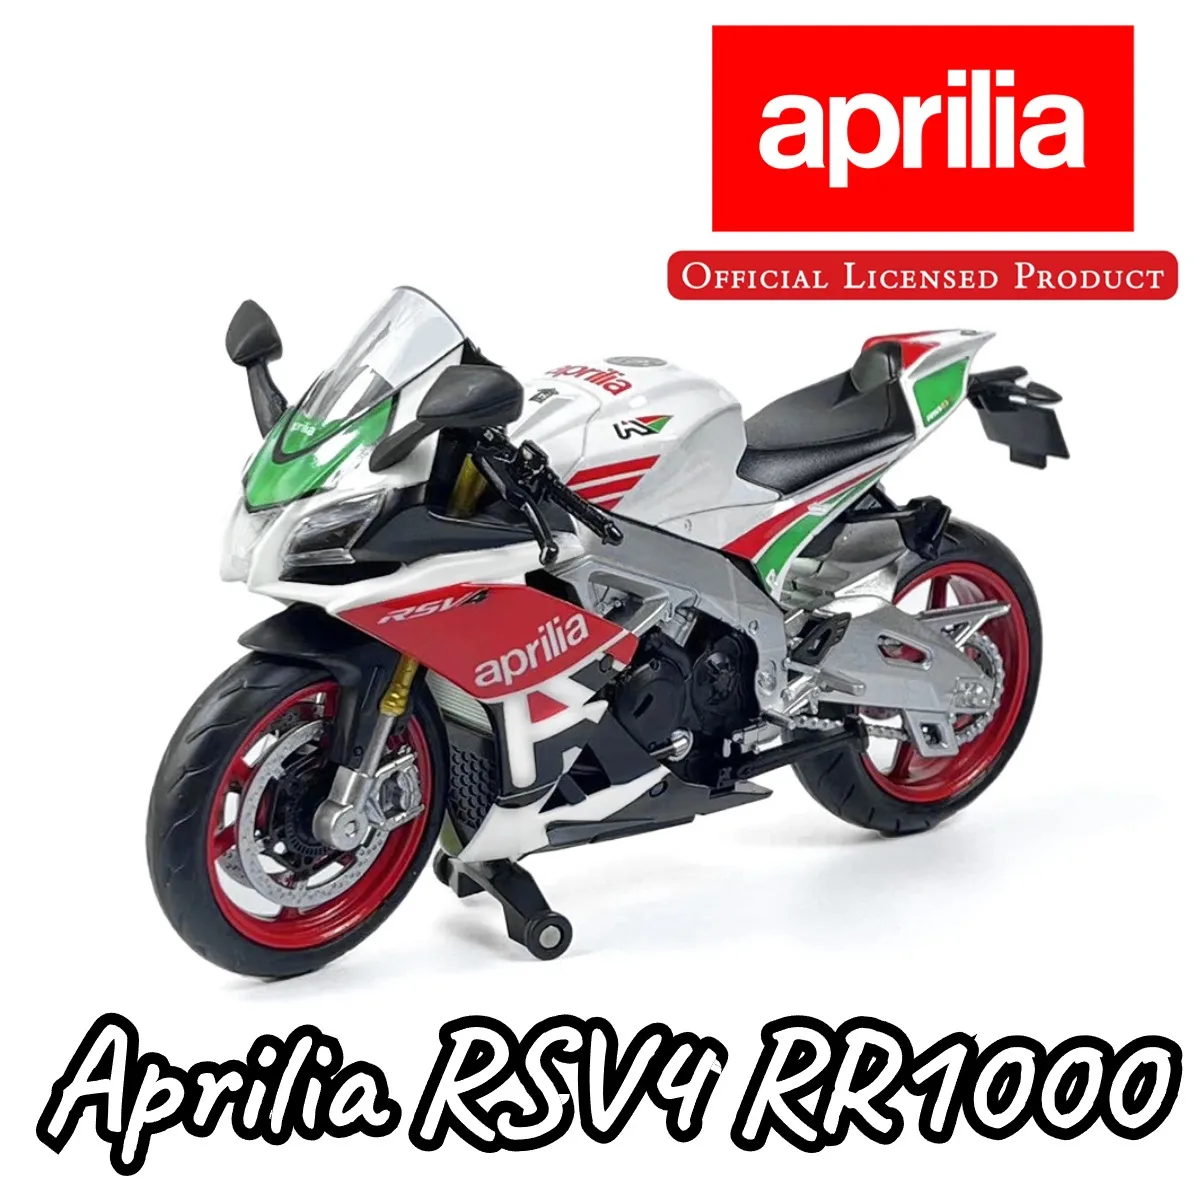 

1/12 Scale Aprilia RSV4 RR1000 Motorcycle Model Sport Replica Diecast Collection Vehicle Interior Decor Xmas Gift Kid Boy Toy